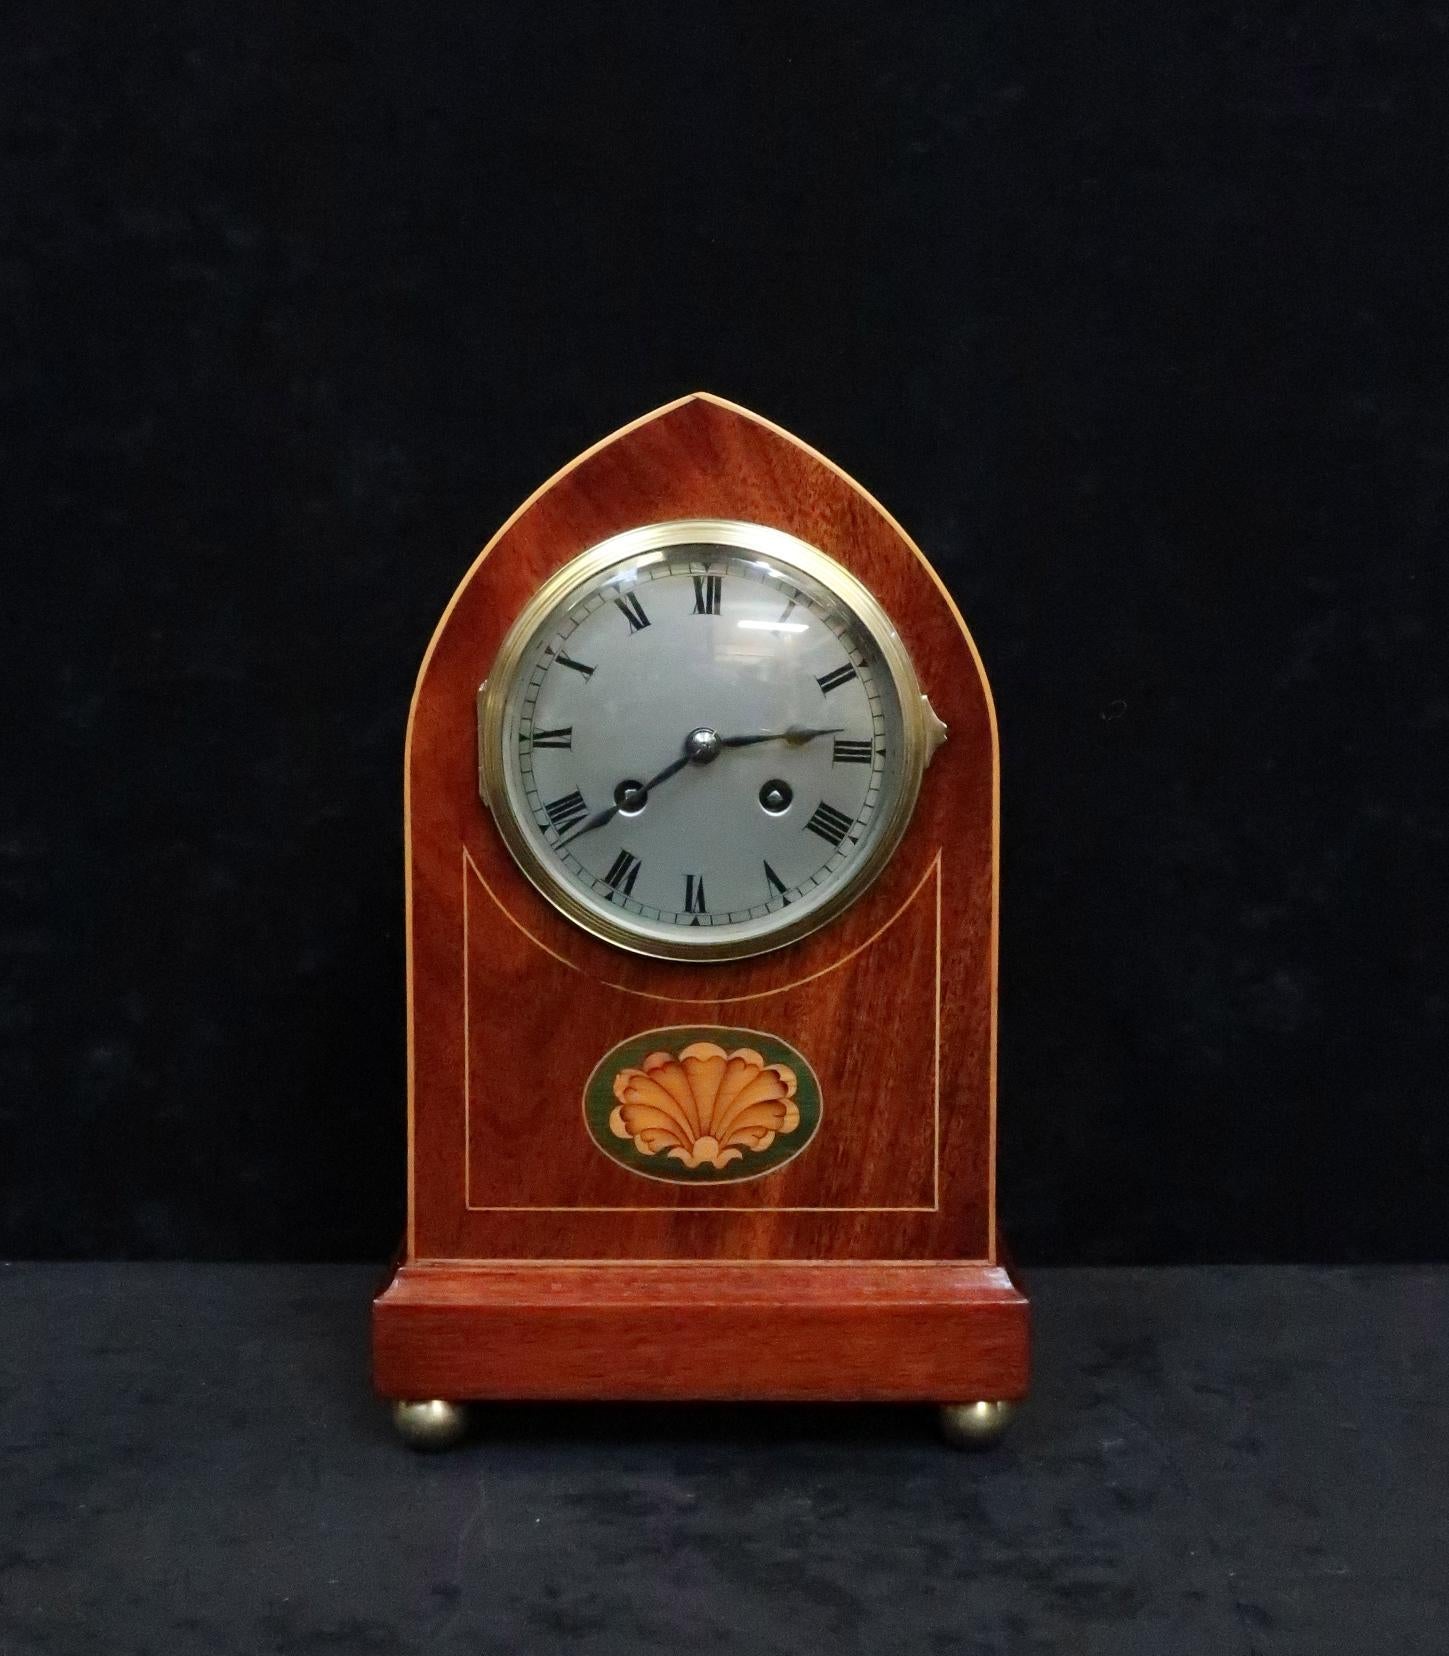 A good quality French Belle Époque figured mahogany lancet top mantel clock with boxwood stringing and shell inlay to the front of the case stood on brass ball feet. The clock has a silvered dial with Roman numerals and a French eight day movement